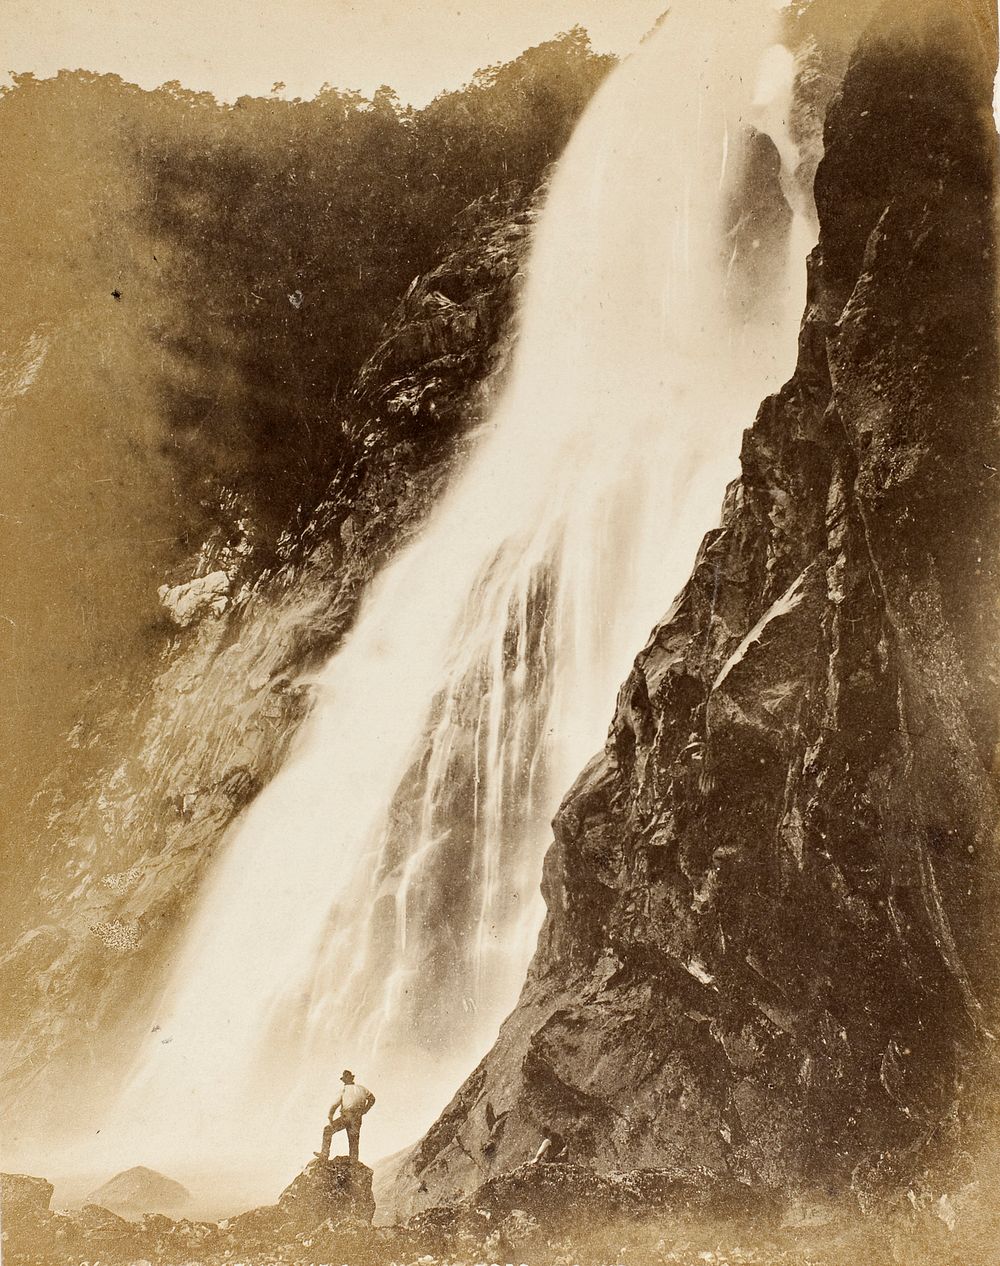 Bowen Fall (540 ft.) Milford Sound (1800s) by Burton Brothers.